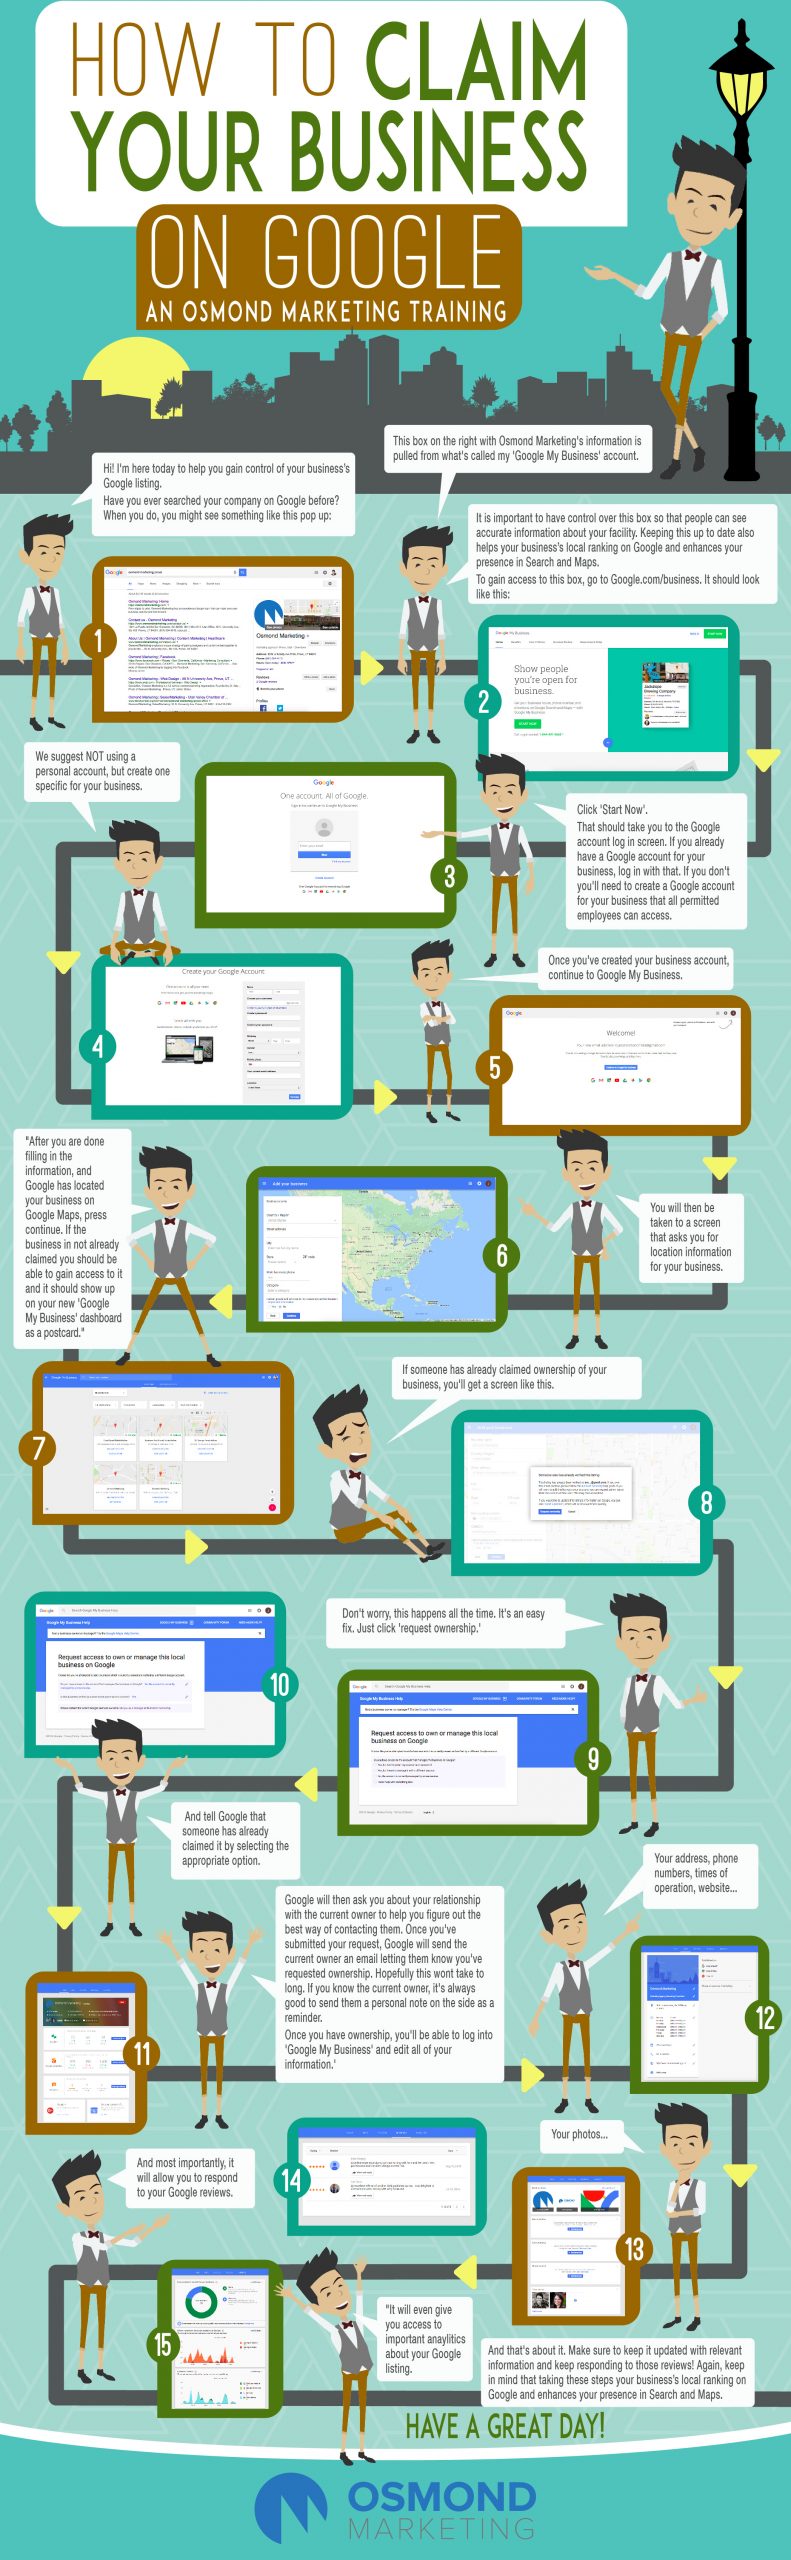 how to claim your business on google infographic